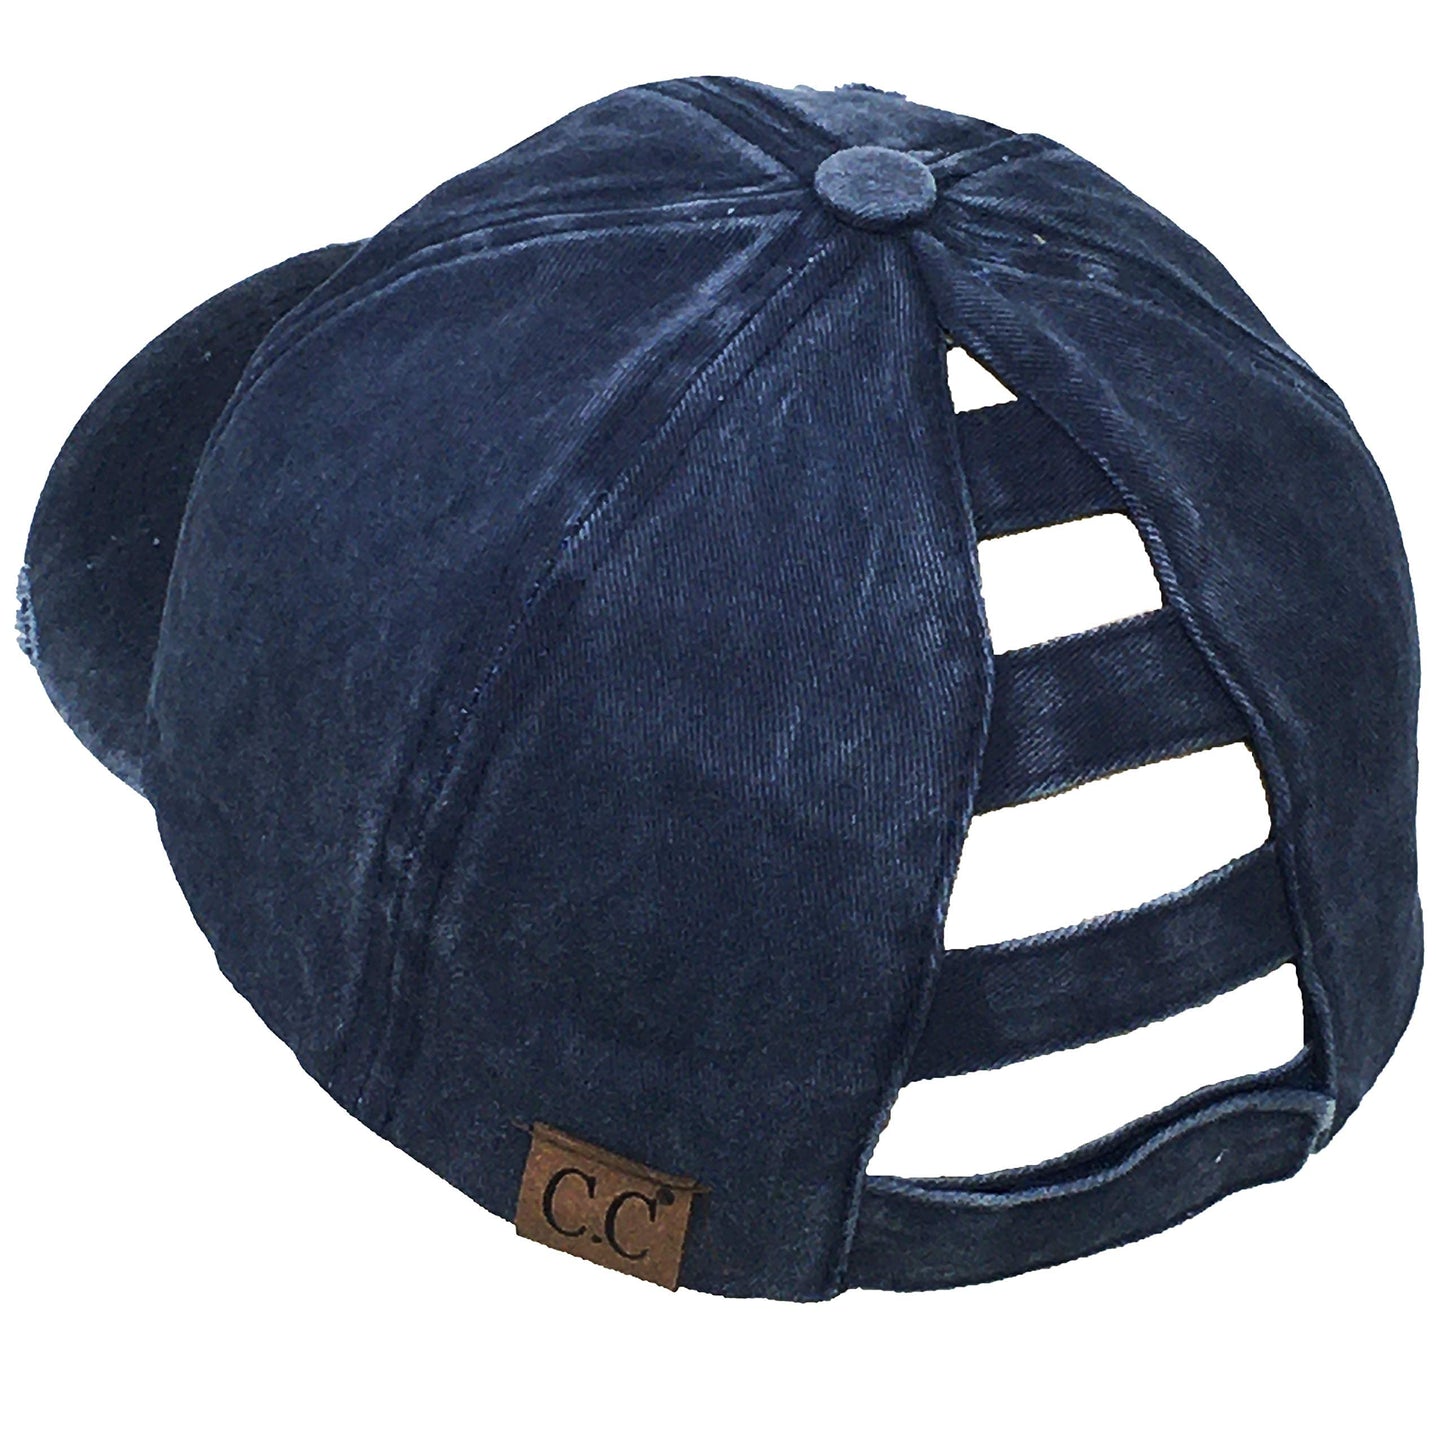 Ladder Back Ponycap by Funky Junque